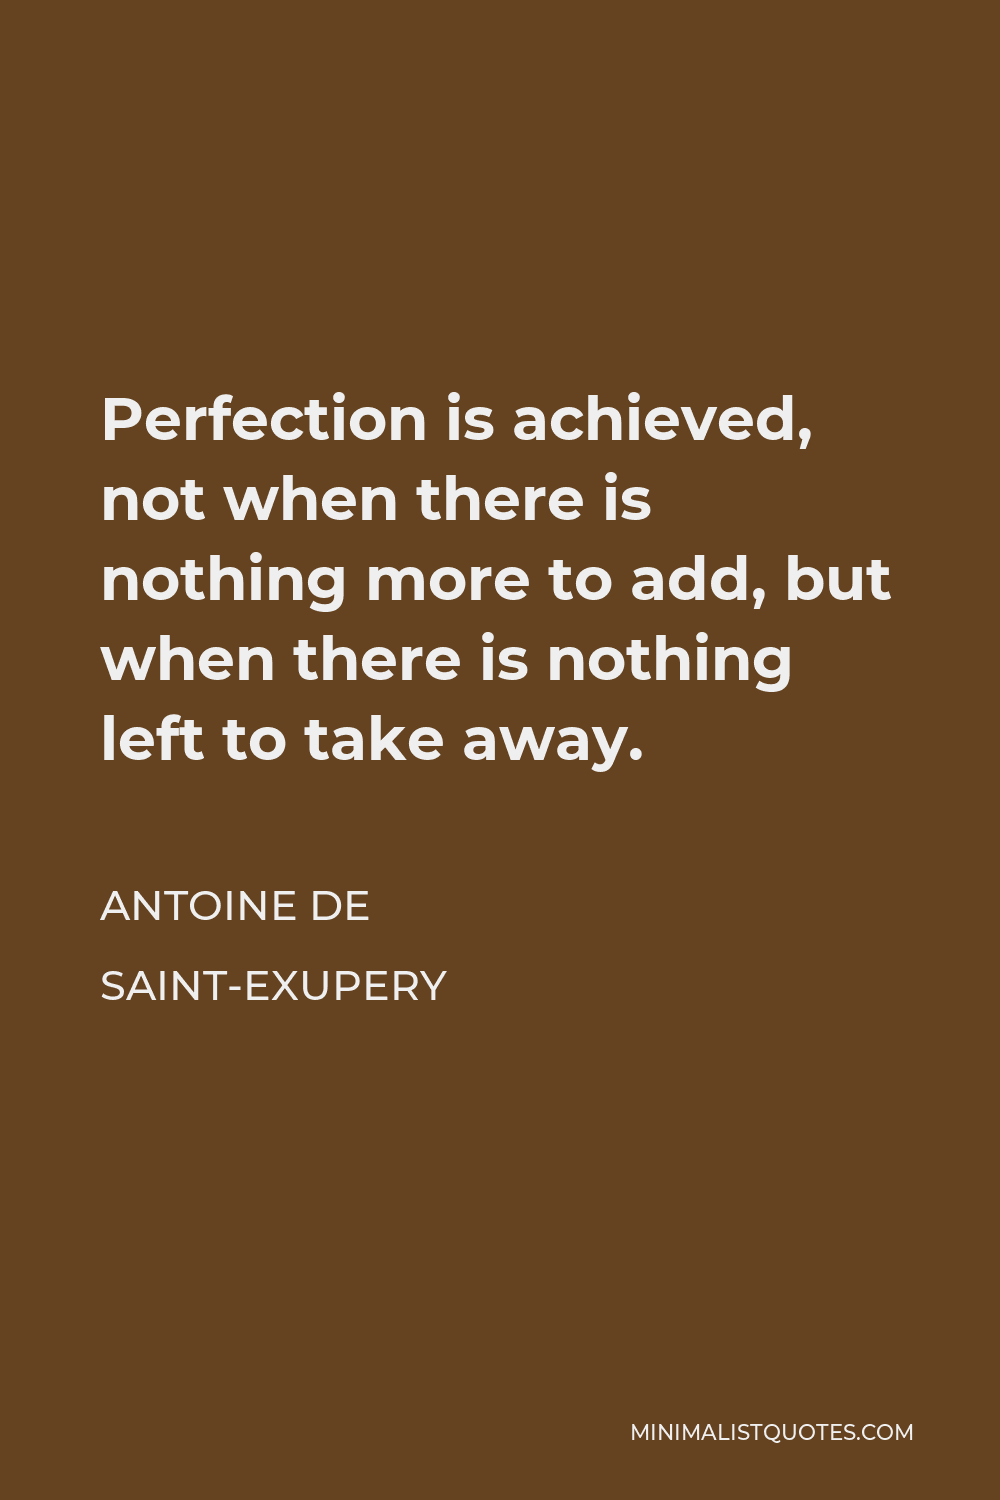 Antoine de Saint-Exupery Quote - Perfection is achieved, not when there is nothing more to add, but when there is nothing left to take away.